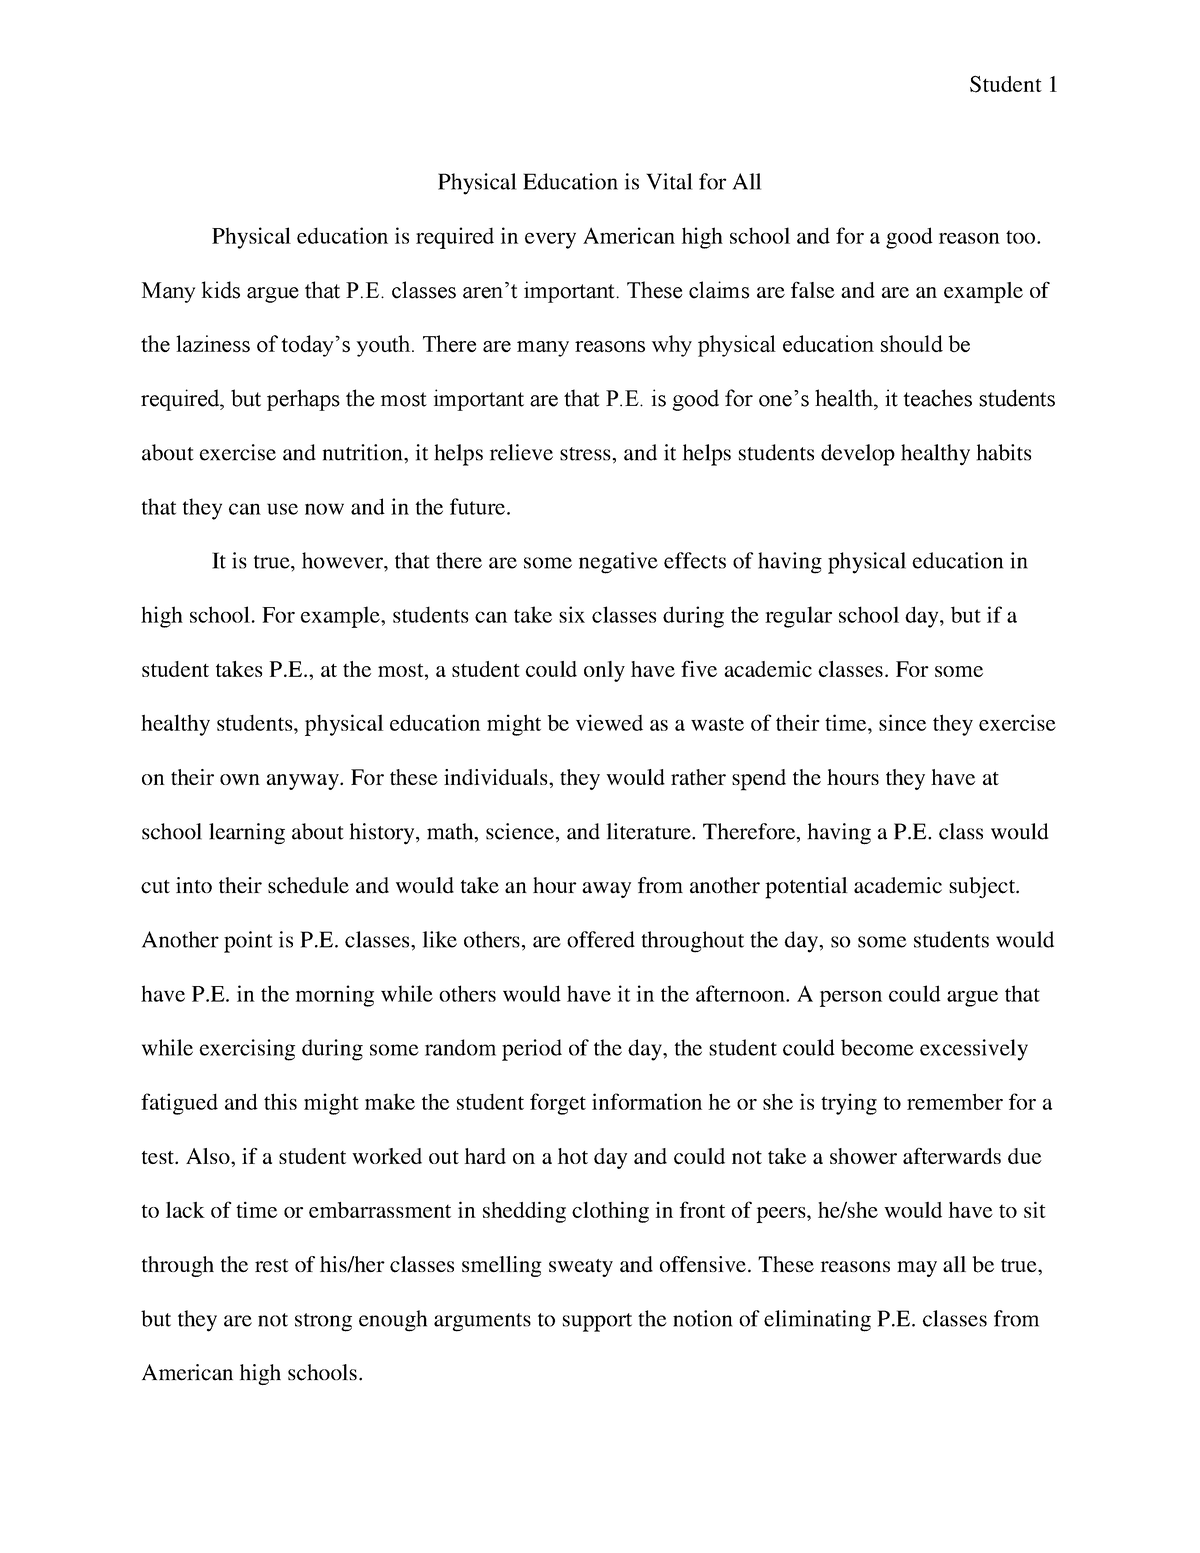 persuasive essay on physical education